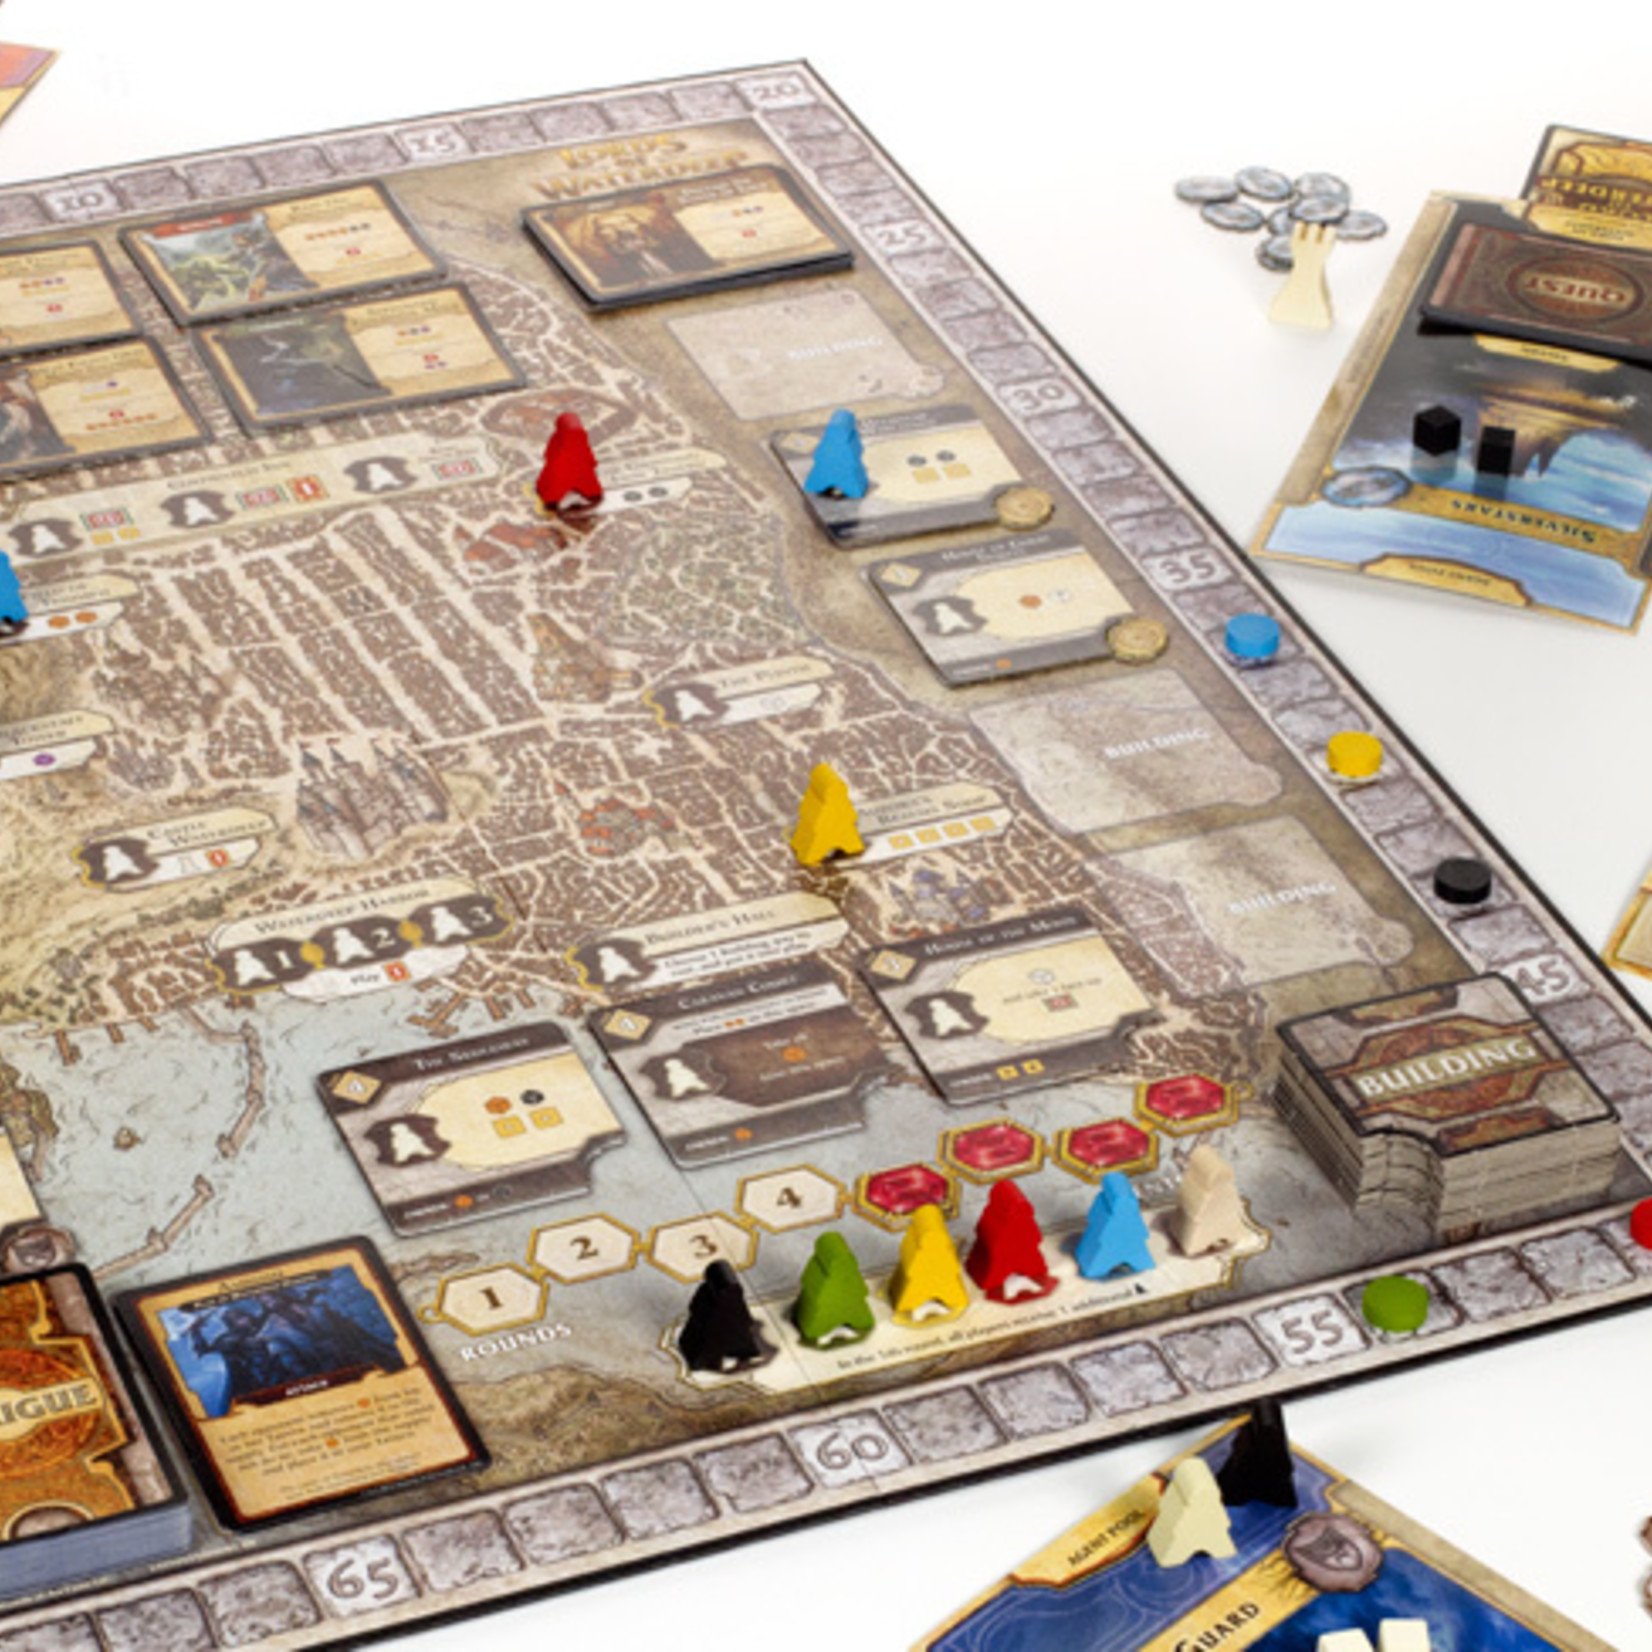 Wizards of the Coast Lords of Waterdeep